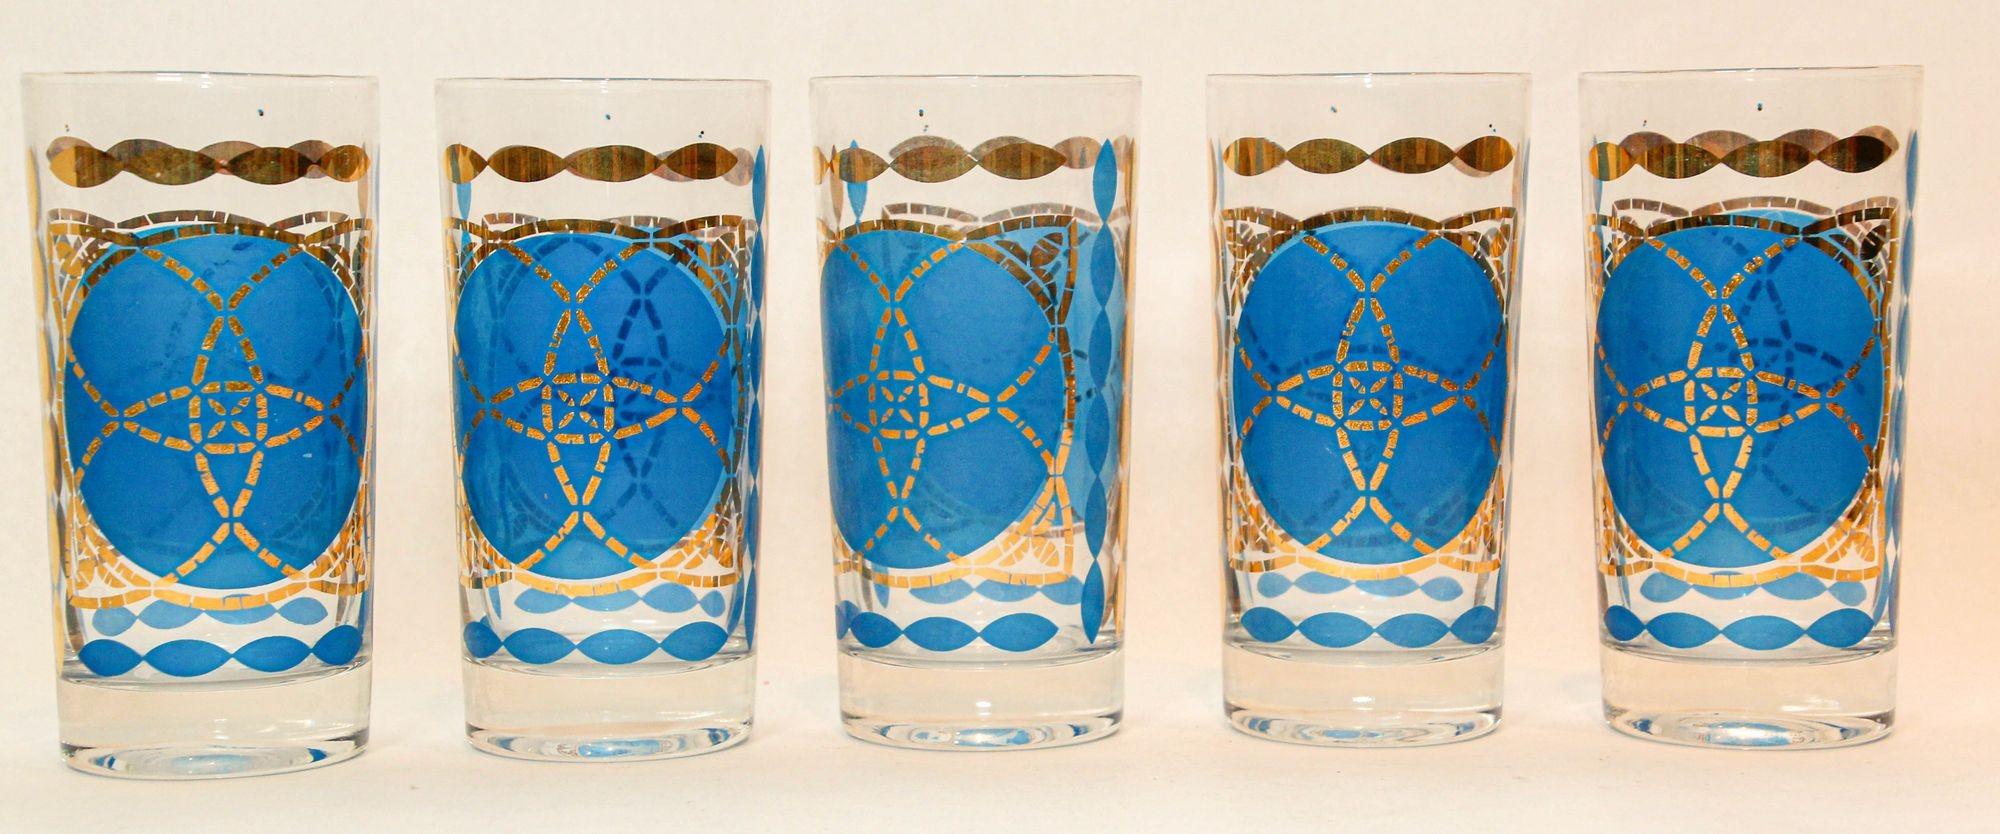 Fantastic mid century vintage cocktail glasses by Georges Briard set of 5.
Collectible 1960s Georges Briard Highball cocktail Glasses Blue and Gold Design Set of 5 Barware set.
Hollywood Regency vintage set of 5 highball tumbler drinking glasses